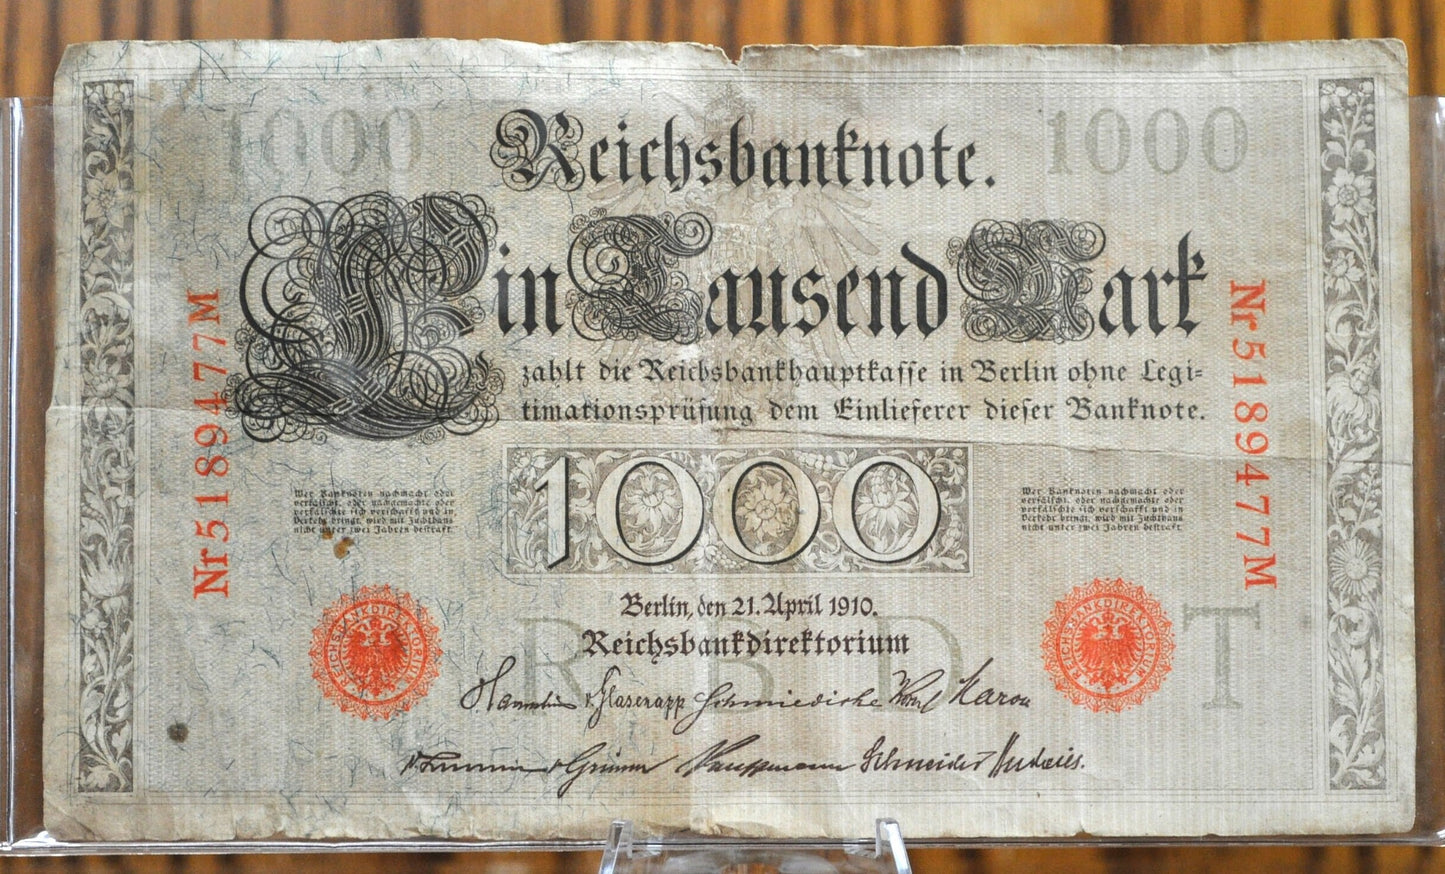 1910 1000 Mark German Paper Note - Reichsbanknote - Great Condition, Beautiful Design - One Thousand Mark Note 1910